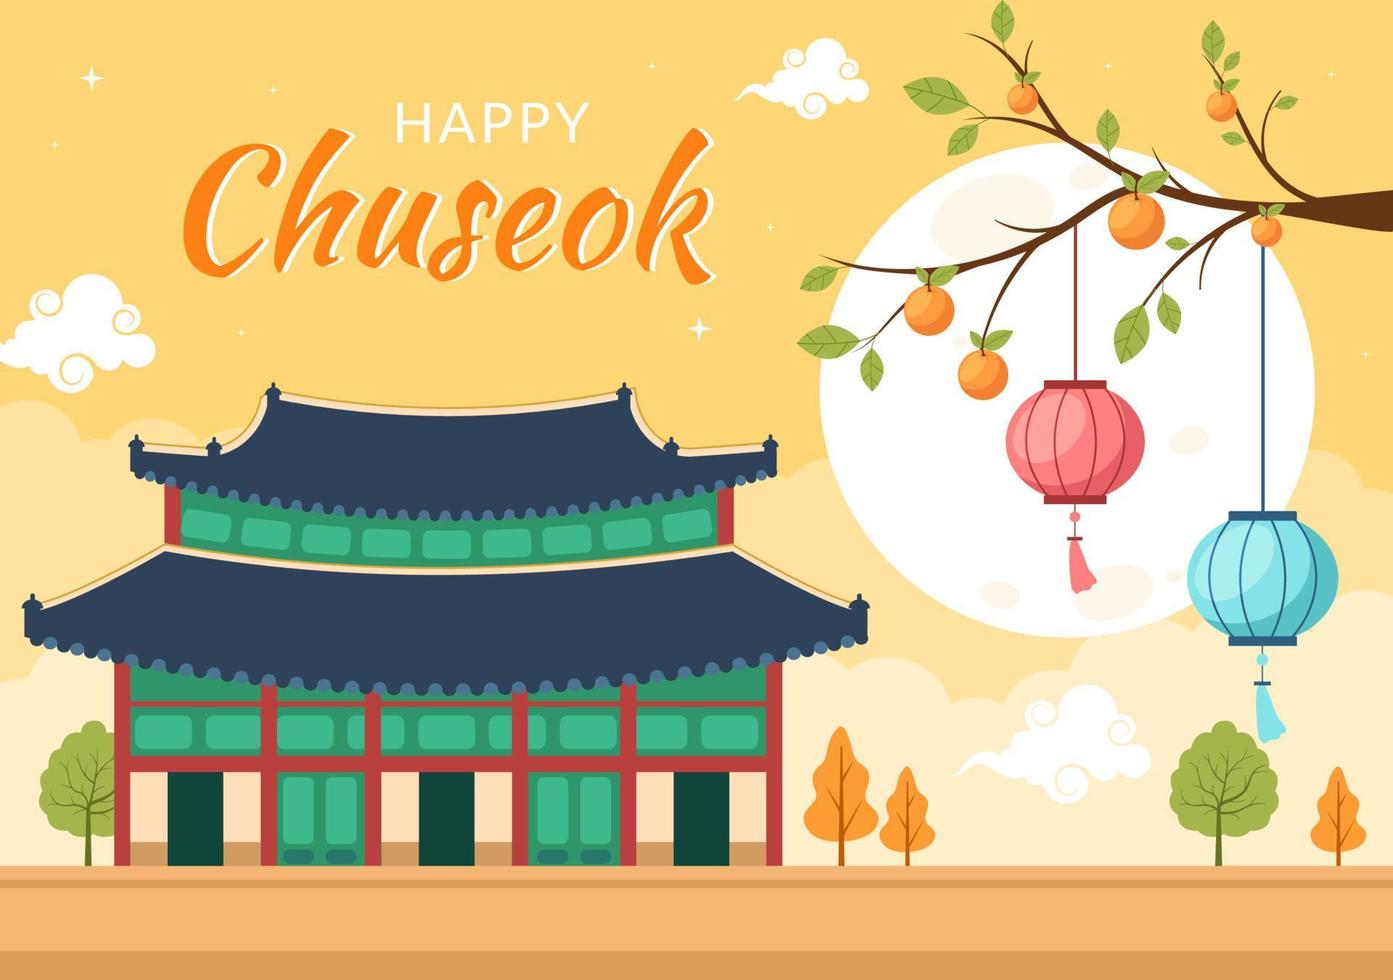 Happy Chuseok Day in Korea for Thanksgiving with Calligraphy Text, Full Moon and Sky Landscape in Flat Cartoon Illustration vector